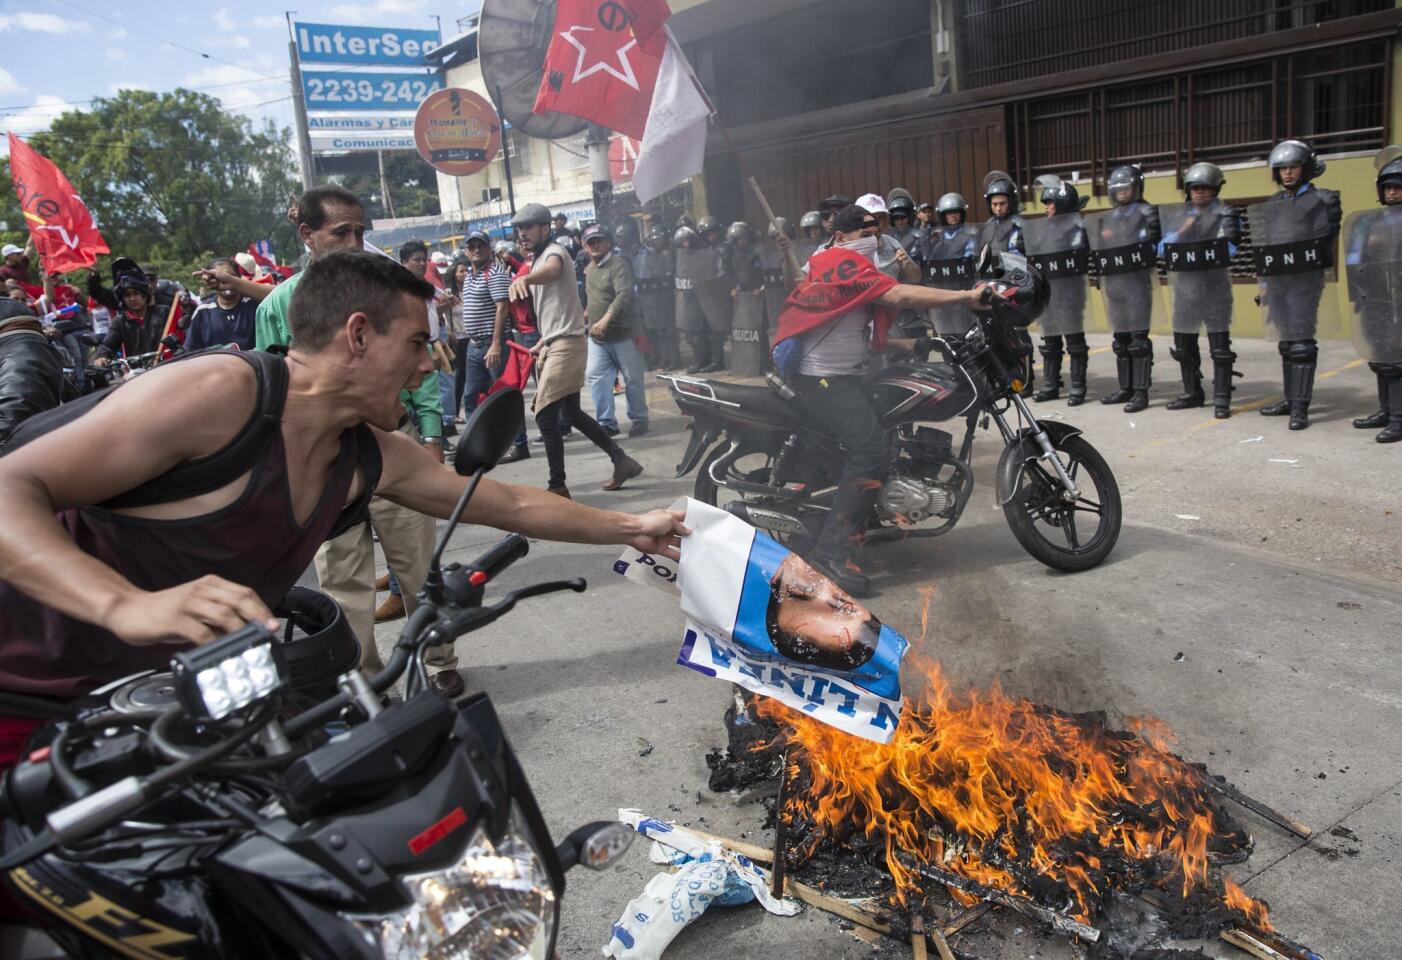 A supporter of Libre Alliance presidential candidate Salvador Nasralla adds to a bonfire of burning banners promoting Honduran President Juan Orlando Hernandez during a protest claiming electoral fraud outside the Supreme Electoral Tribunal in Tegucigalpa, Honduras.